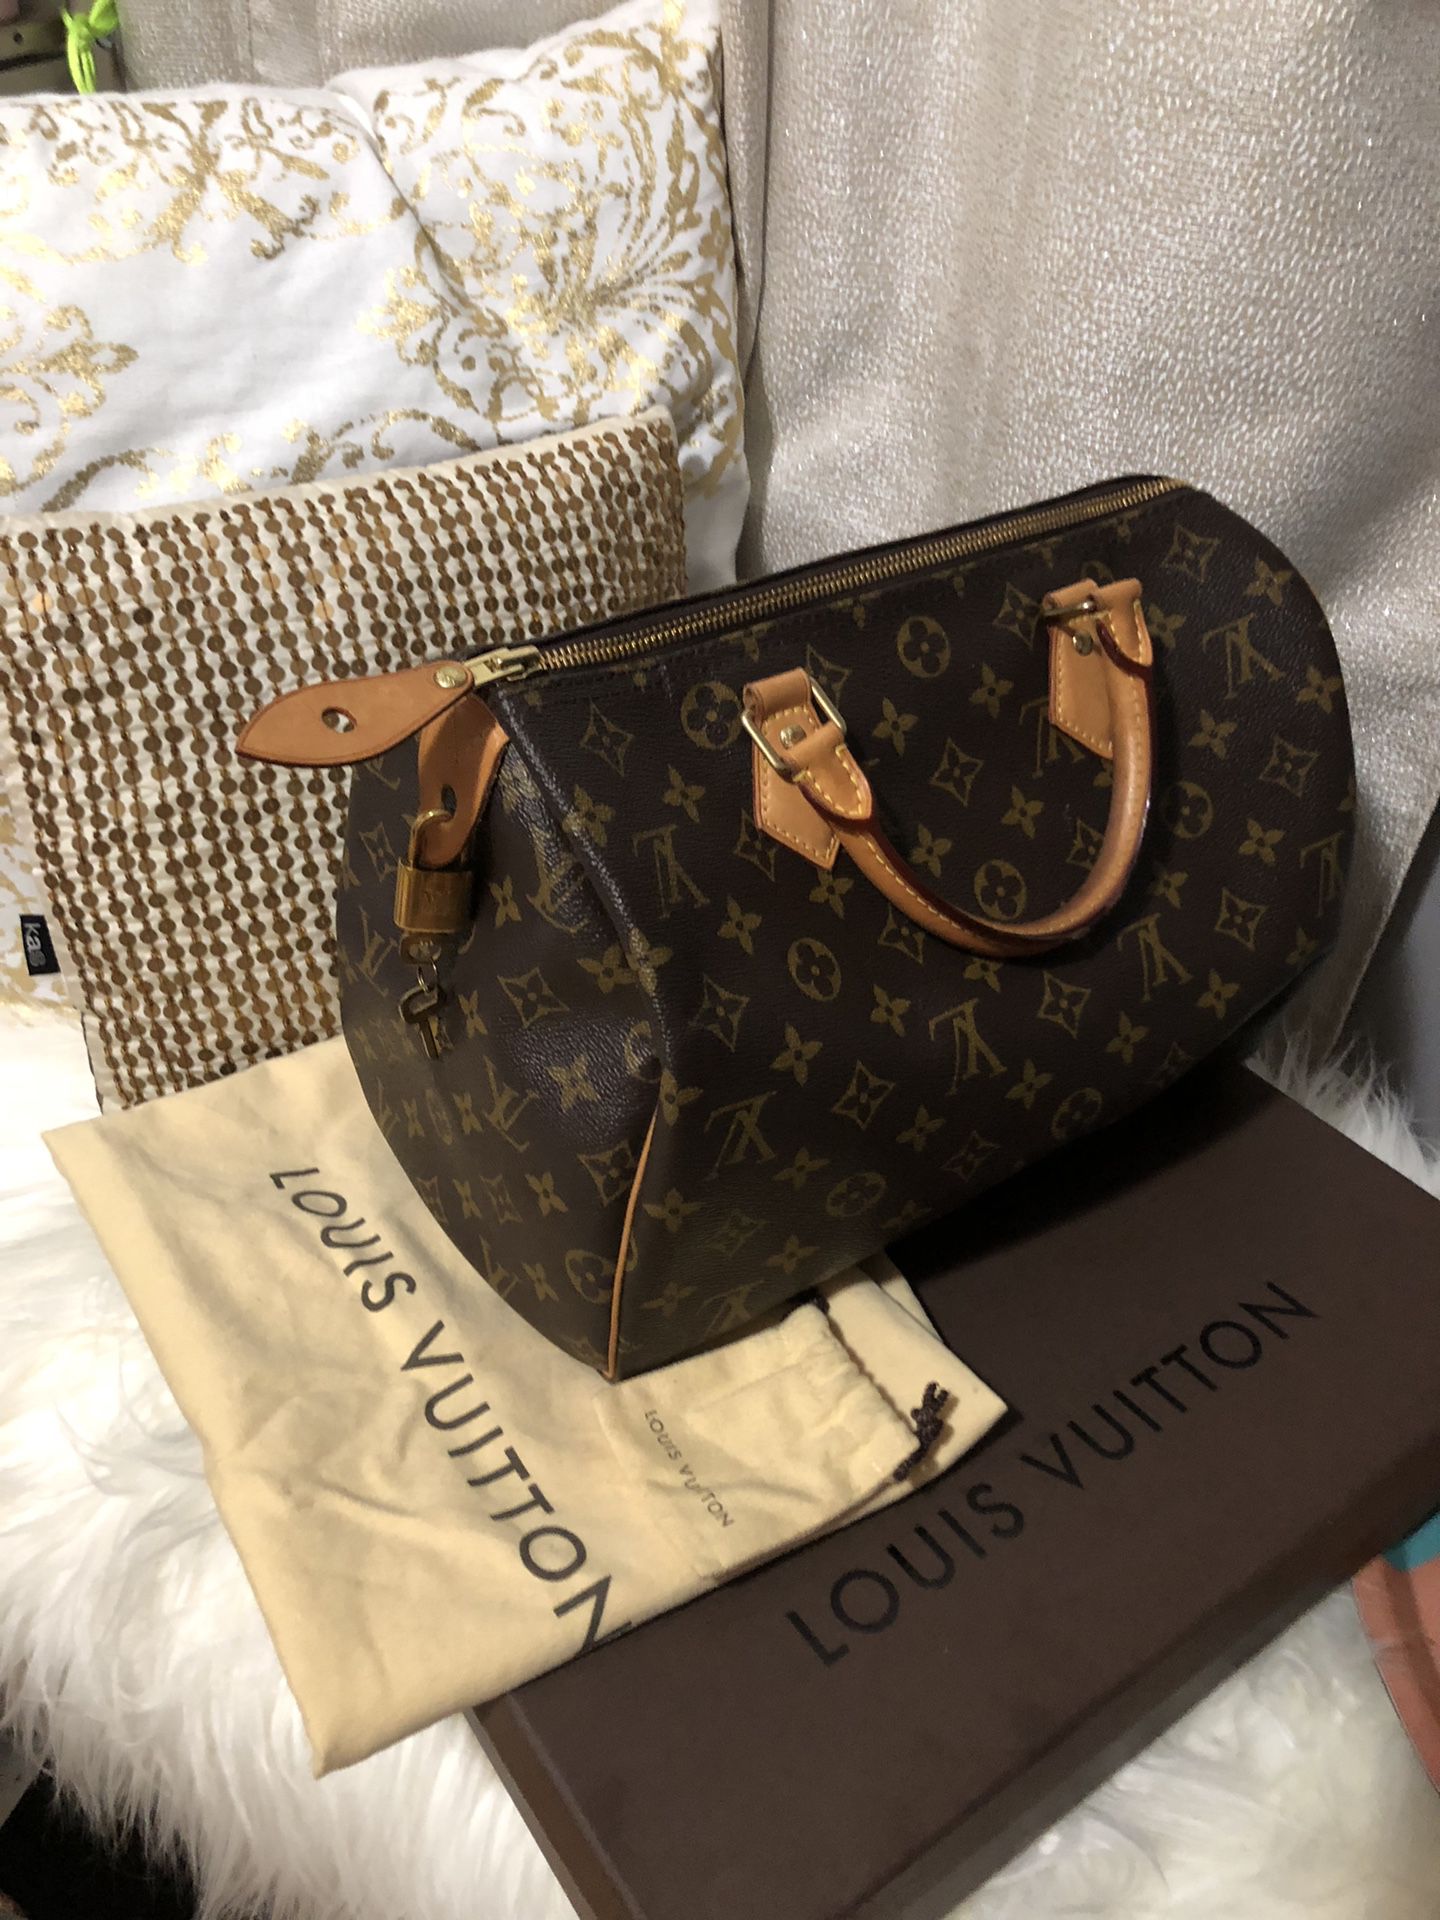 In amazing condition LV speedy 30 comes with box/dust bag and keys